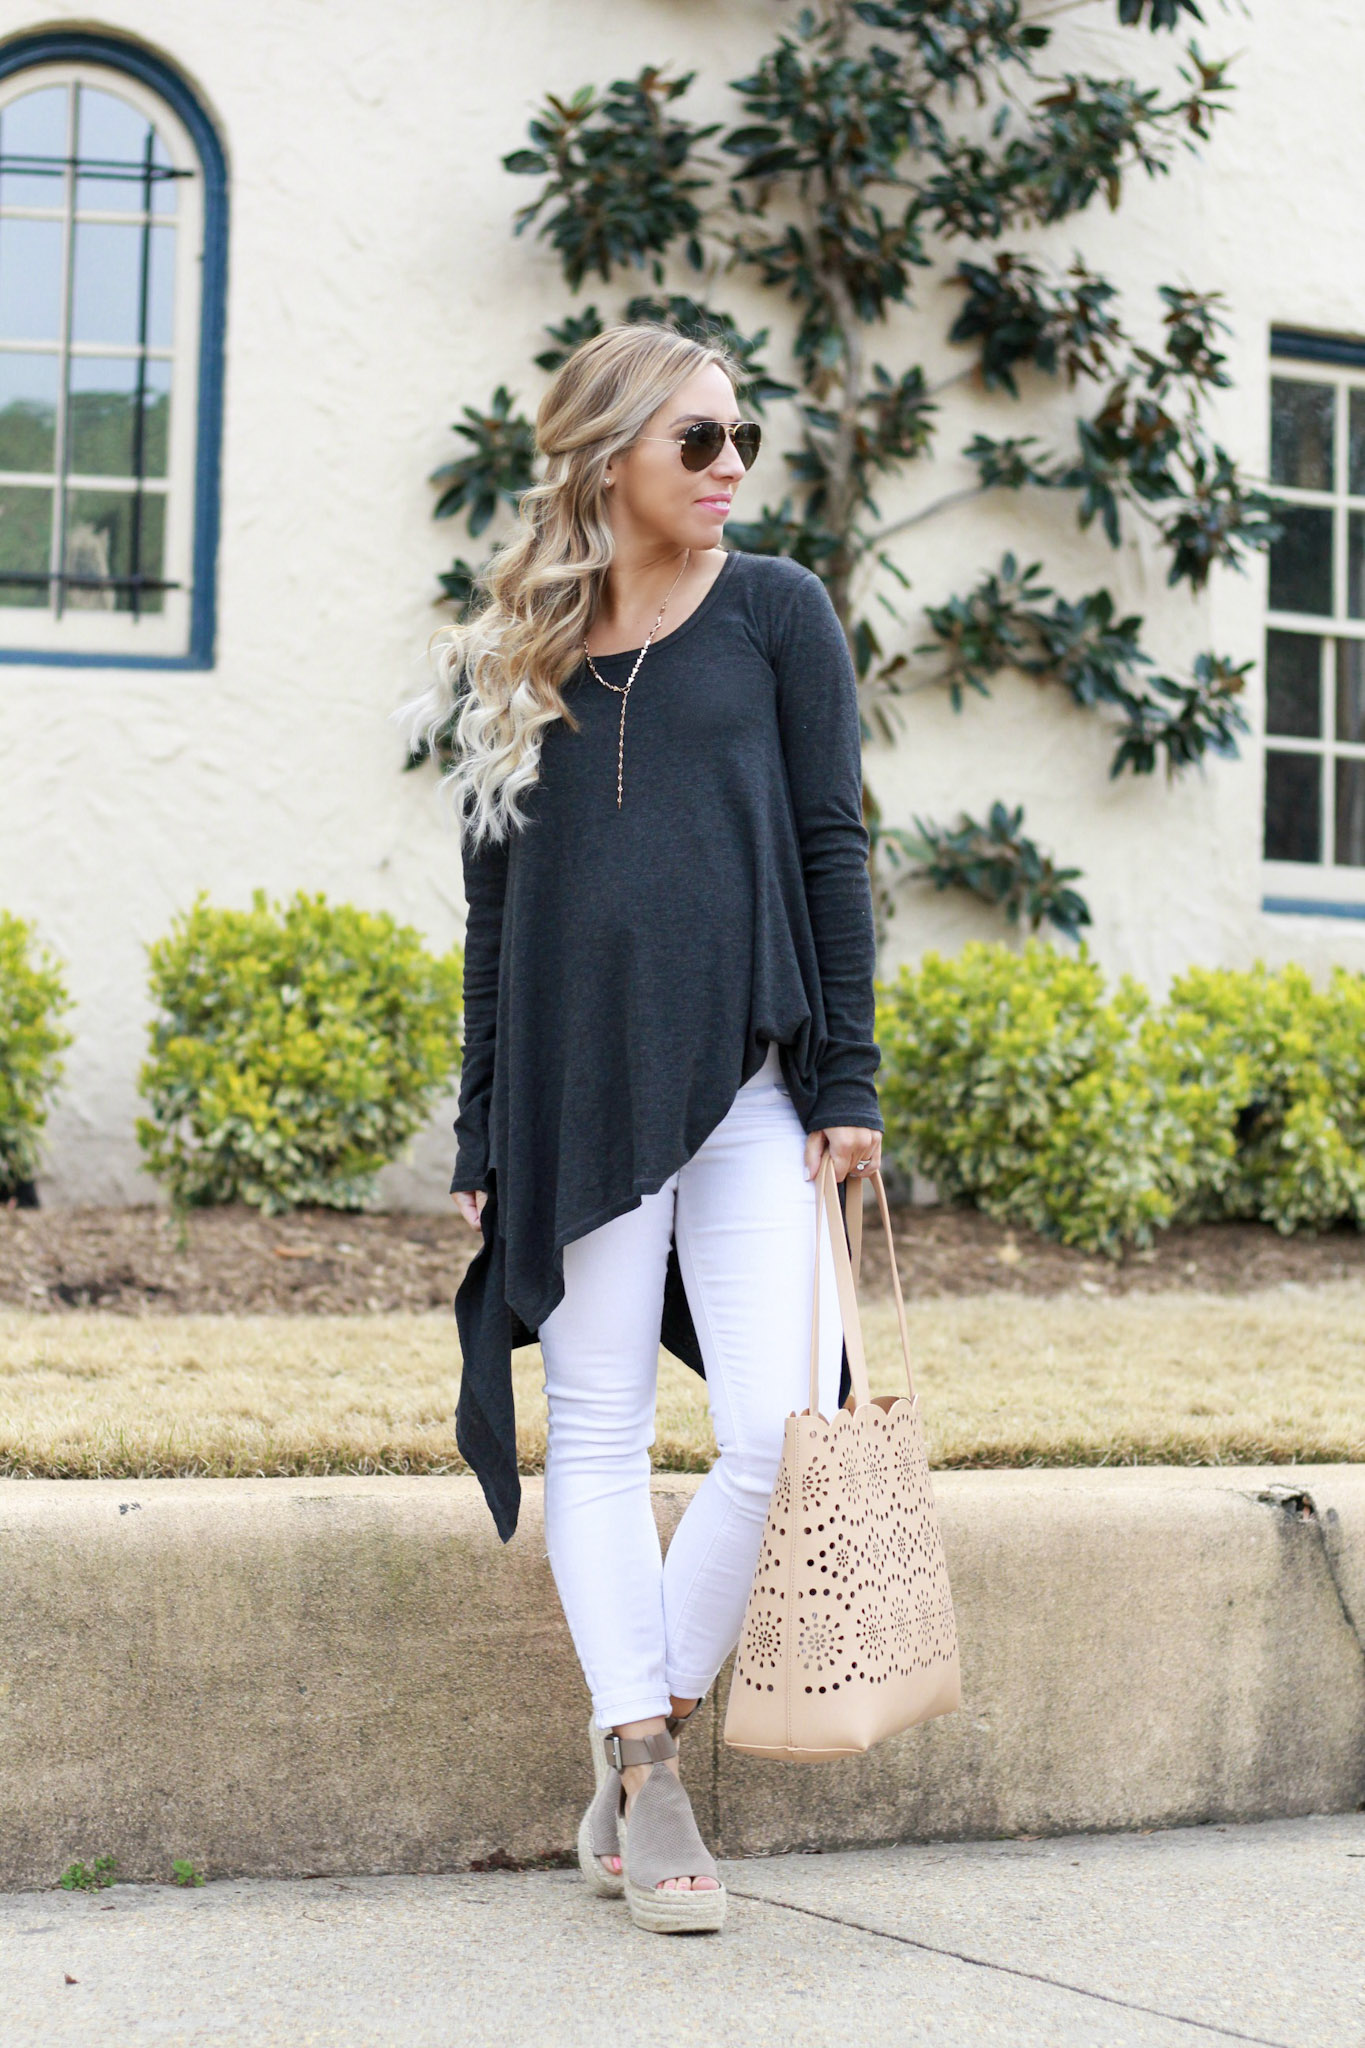 Handkerchief Tunic Top & Must Have Spring Wedges